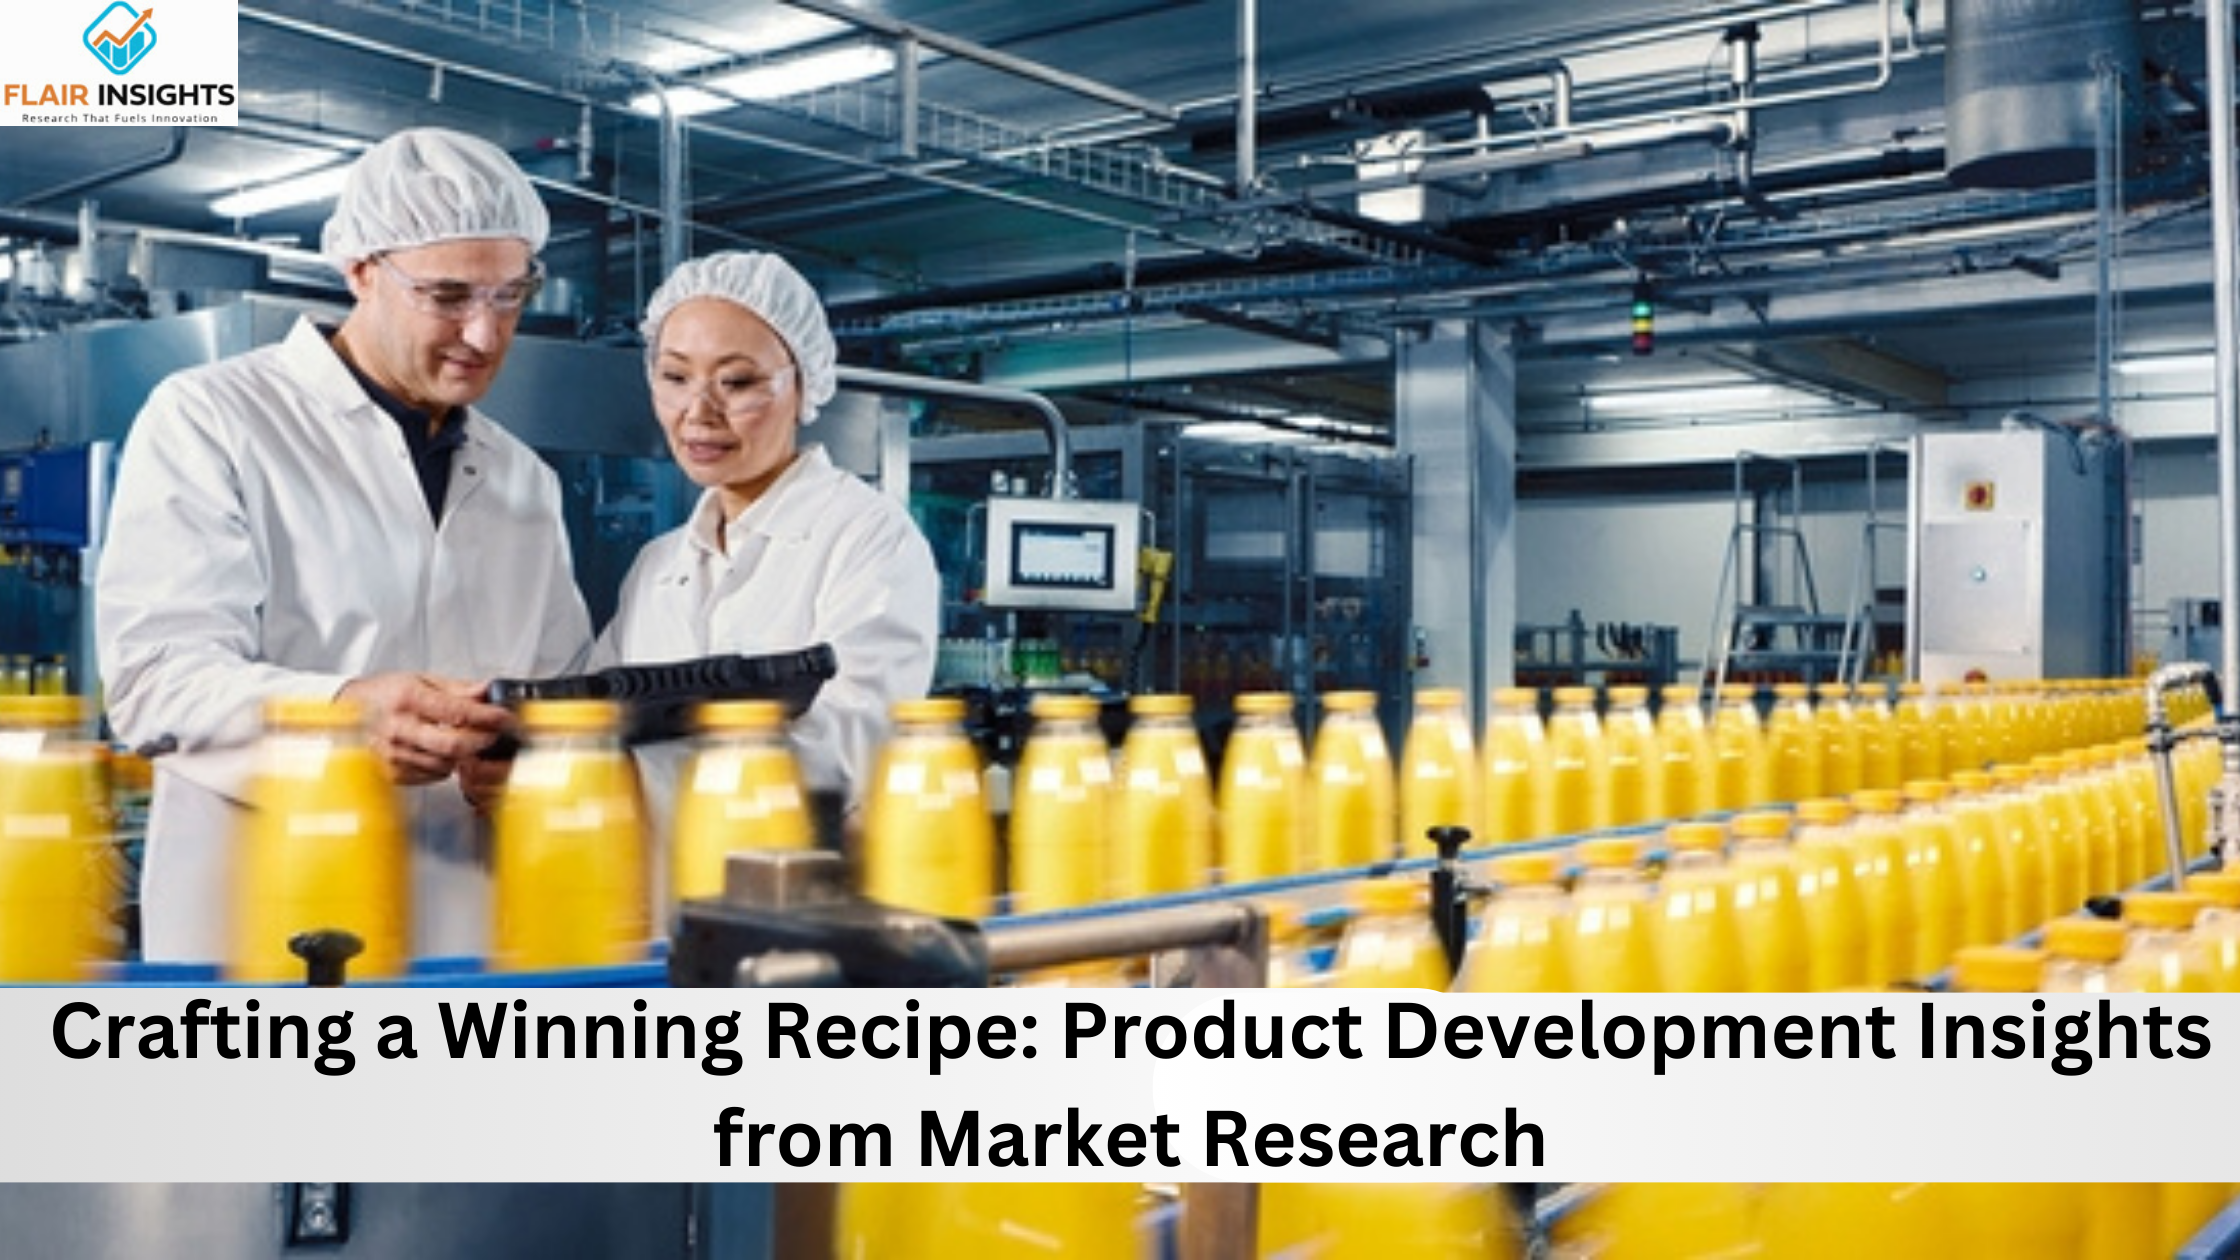 Crafting a Winning Recipe: Product Development Insights from Market Research